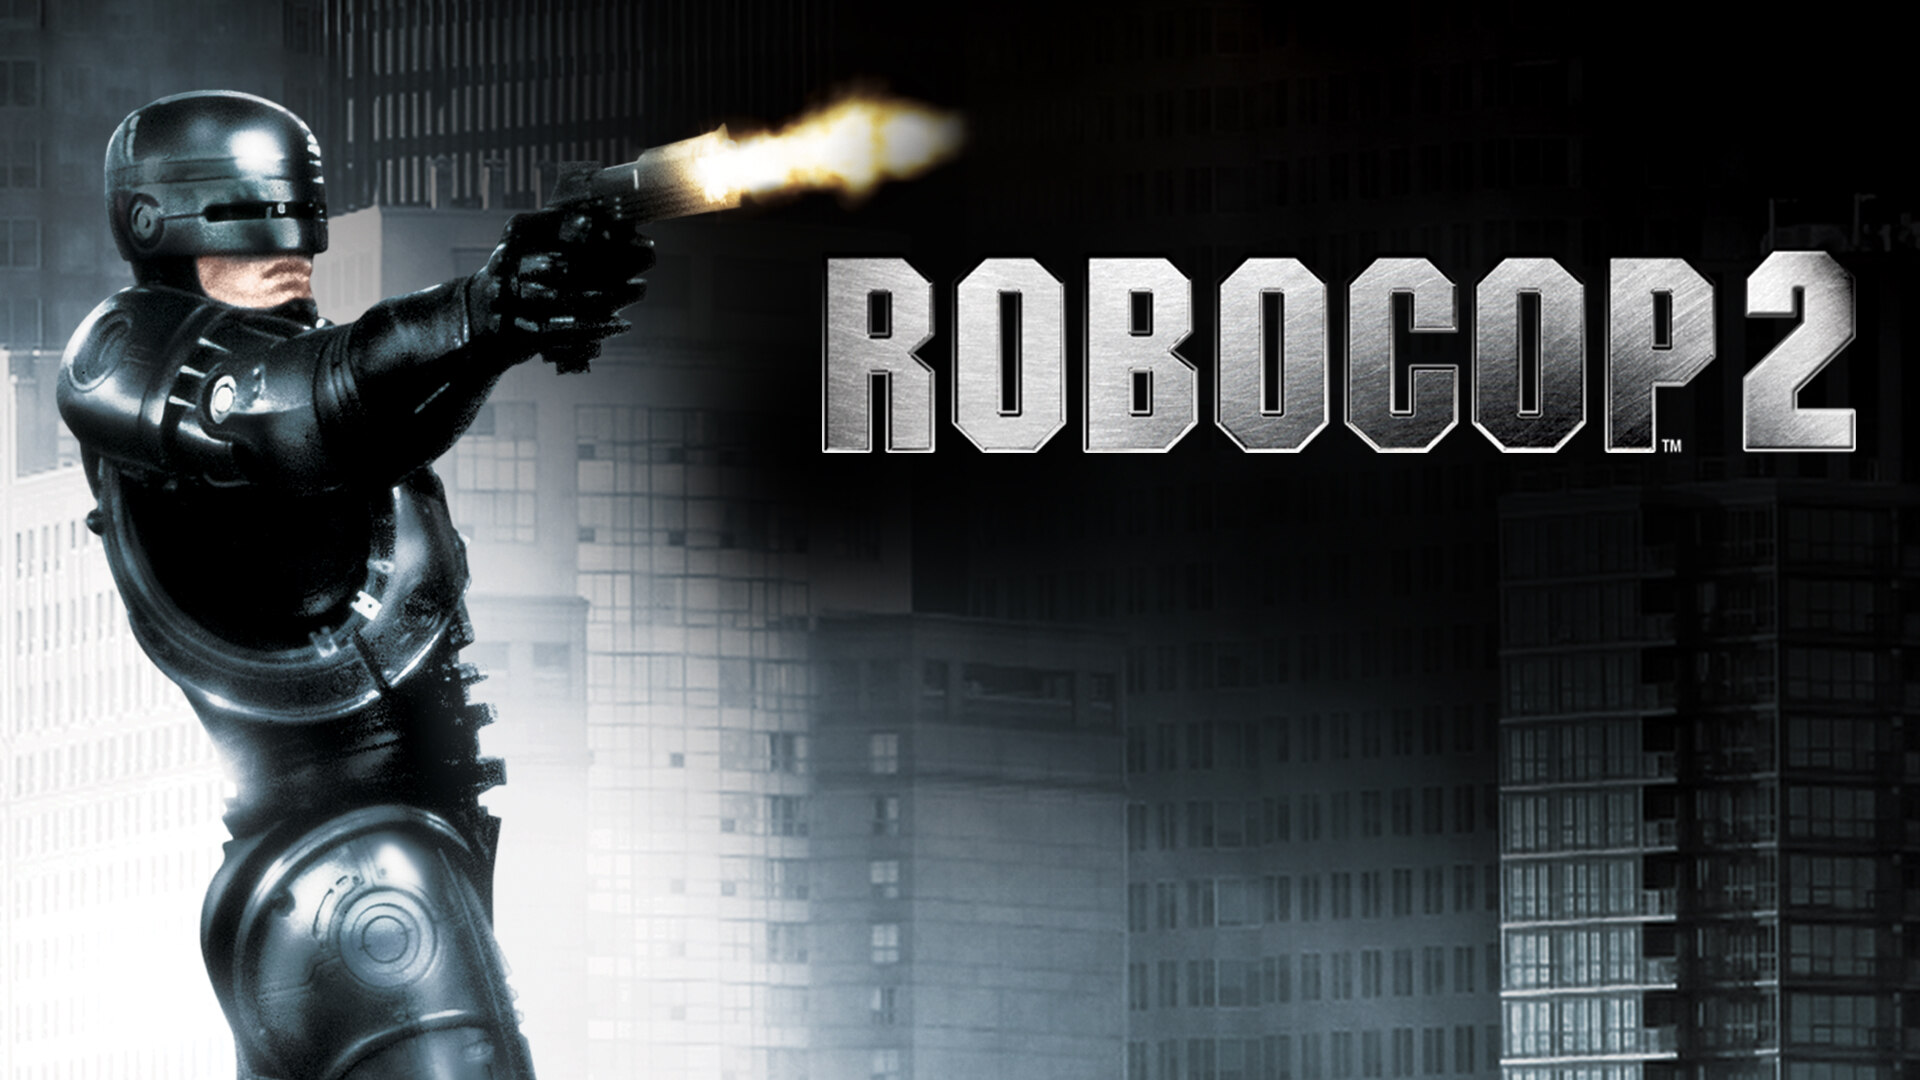 49-facts-about-the-movie-robocop-2